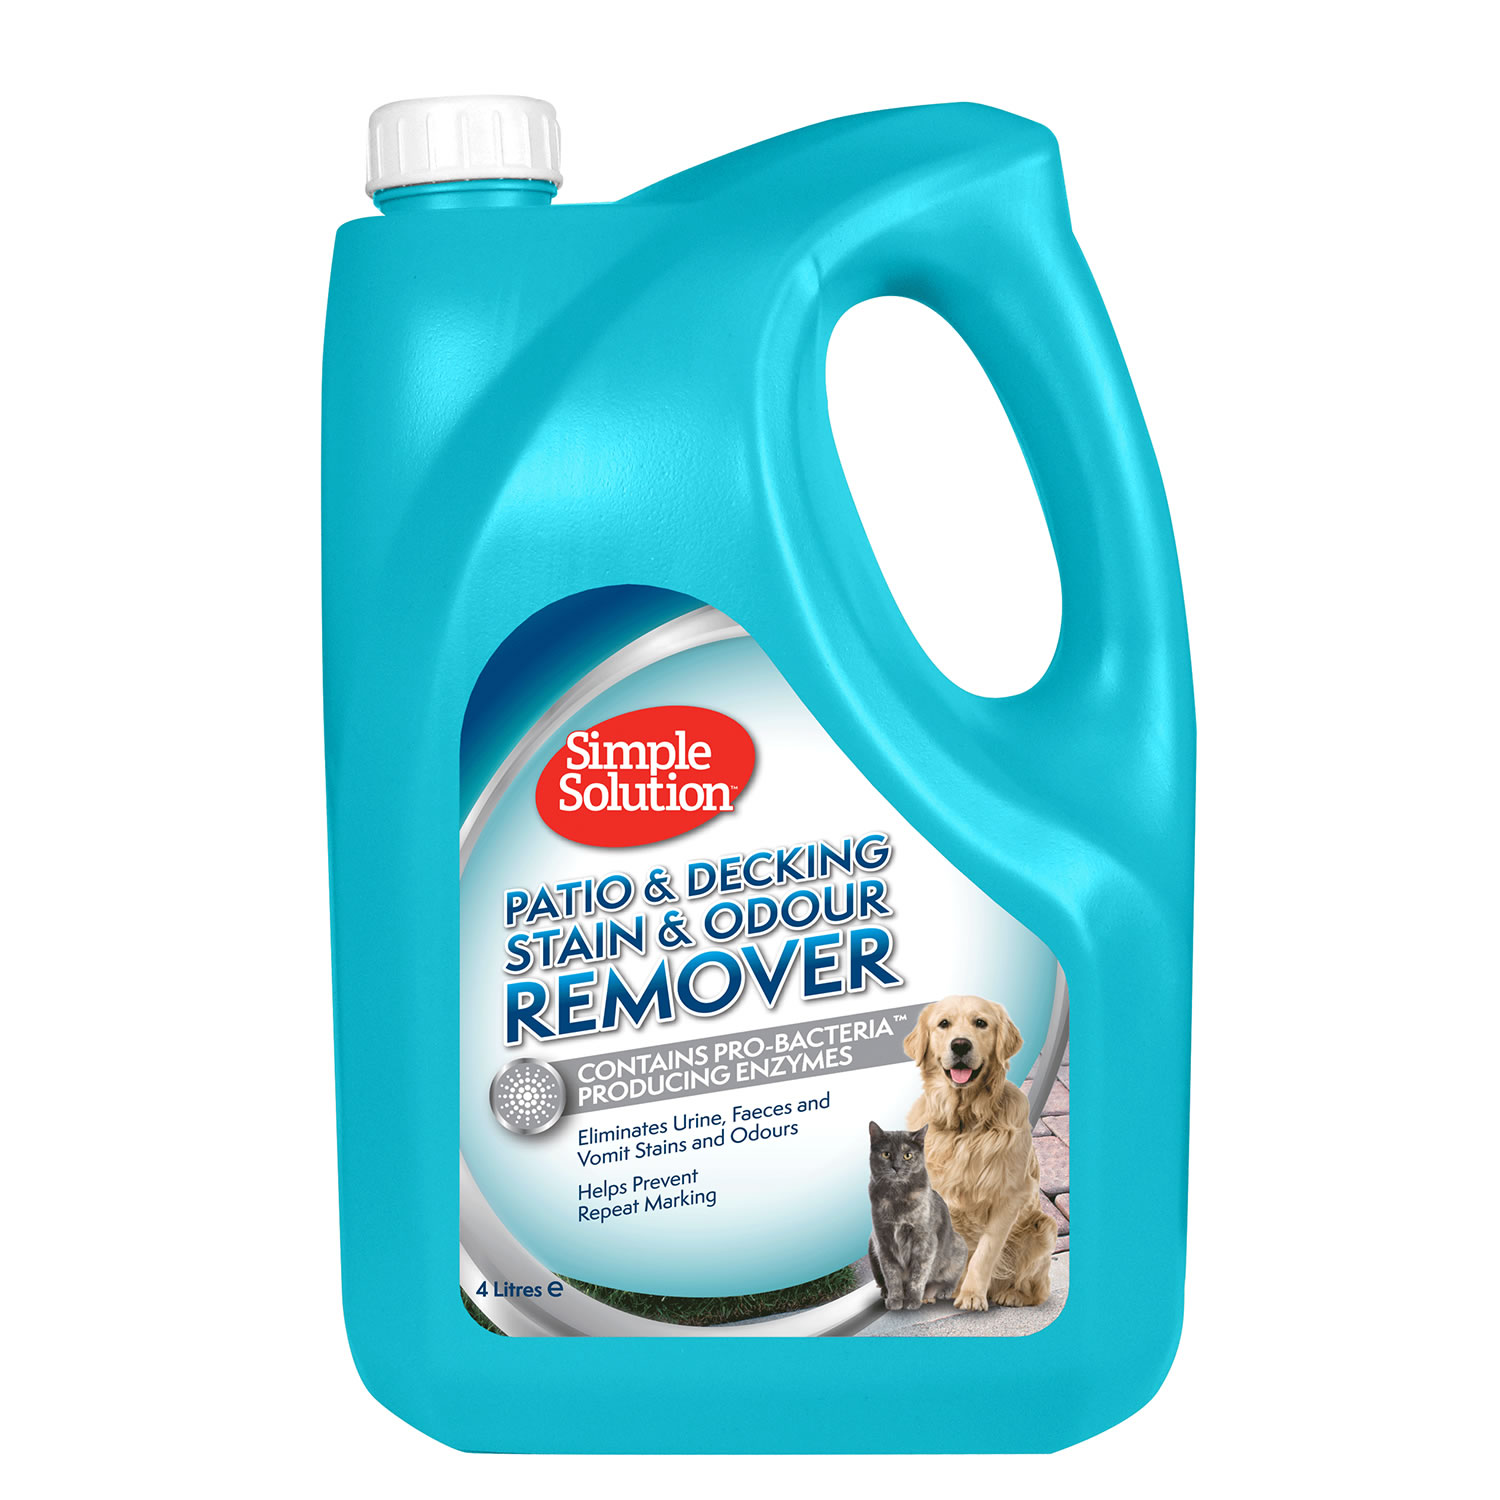 SIMPLE SOLUTION PATIO & DECKING STAIN & ODOUR REMOVER 4 LT 4 LT